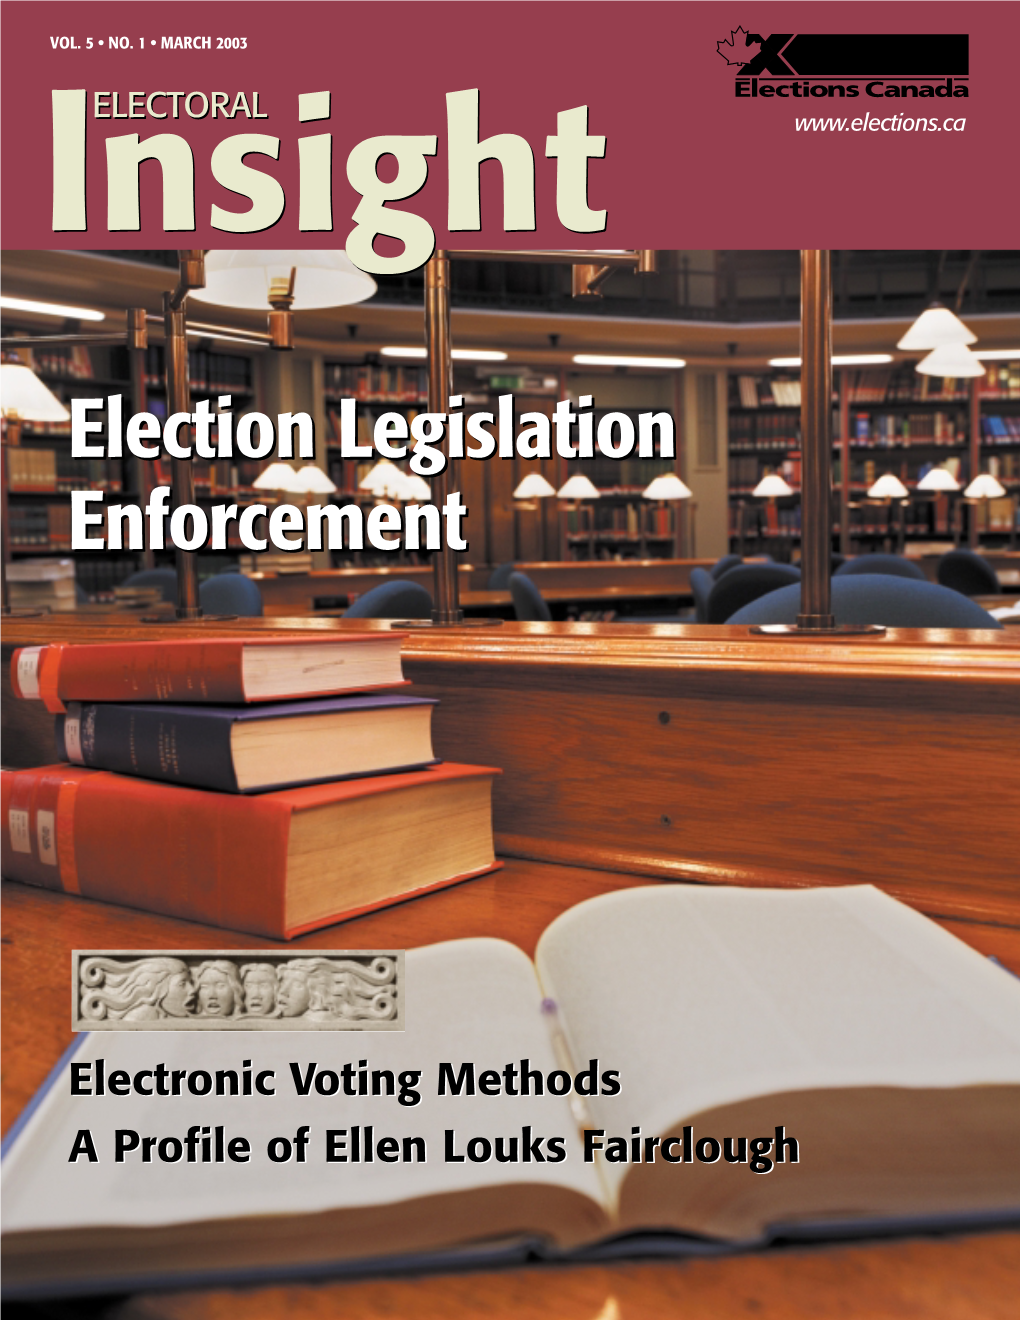 Electoral Insight House of Commons, Ottawa Federal Elections and Referendums Readers Are Welcome, Although Publication Cannot Be Guaranteed